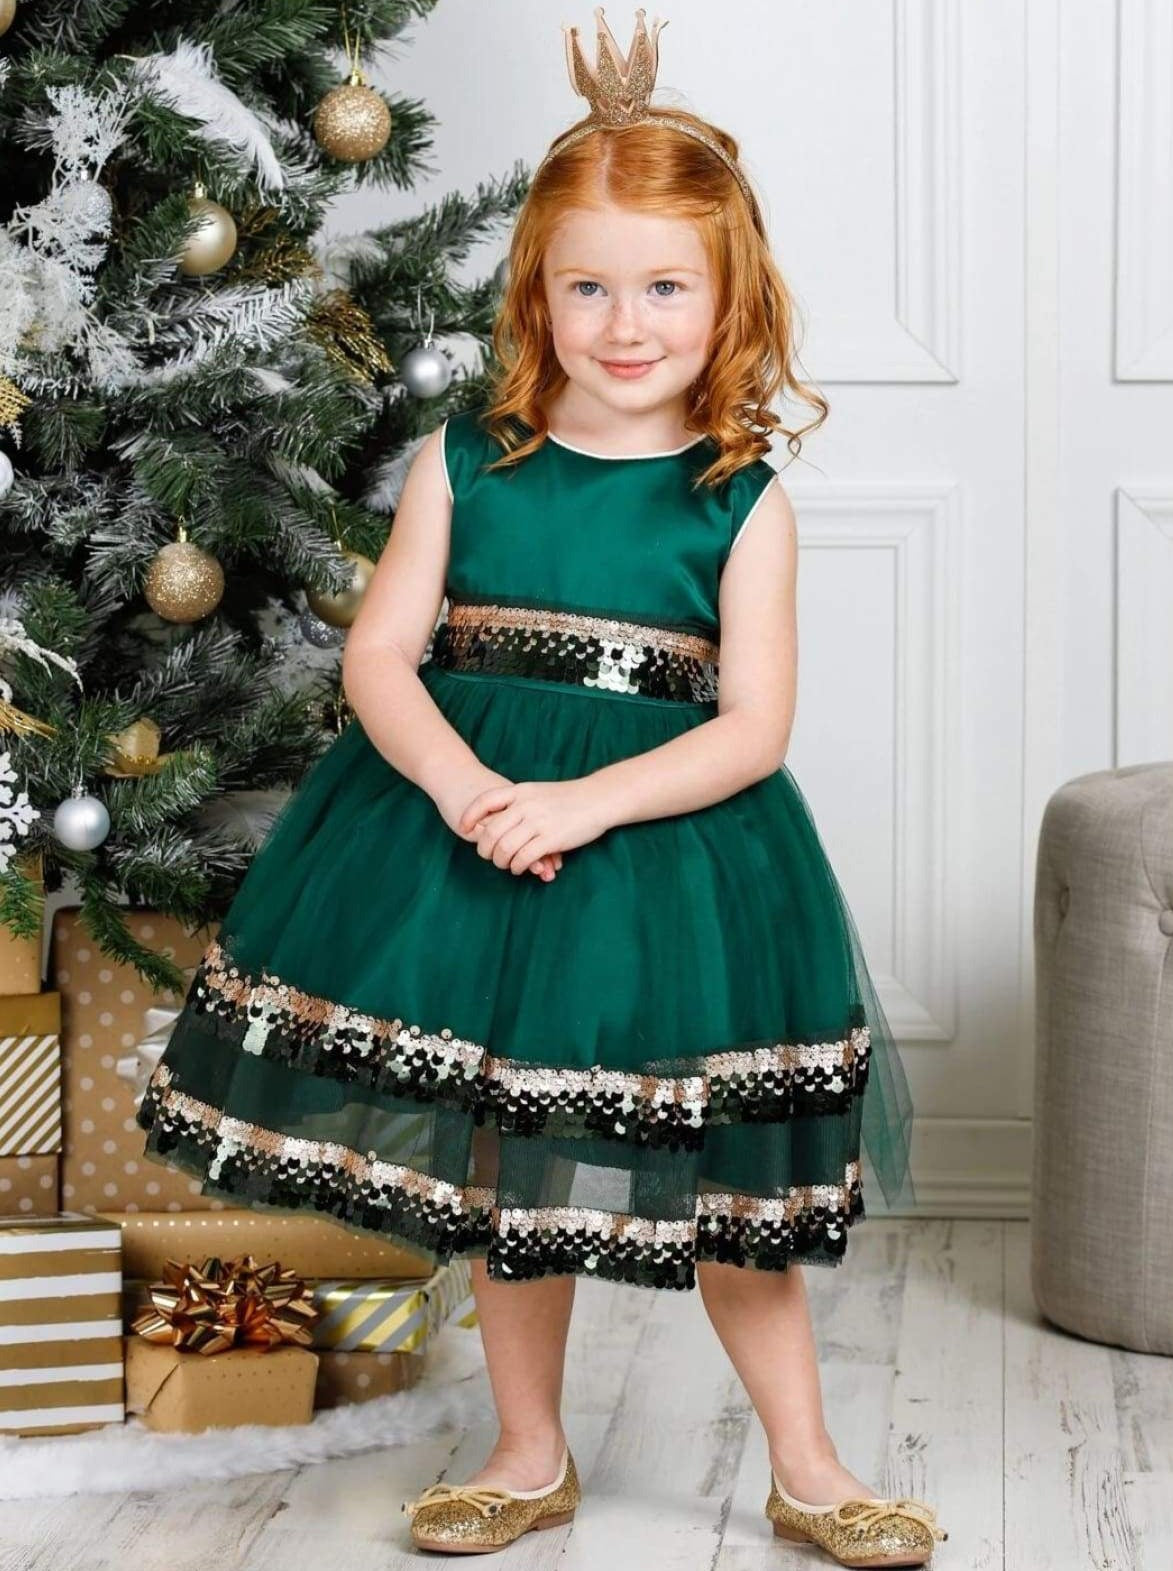 Girls Sparkle Dresses | Tiered Sequined Tulle Dress | Winter Formal